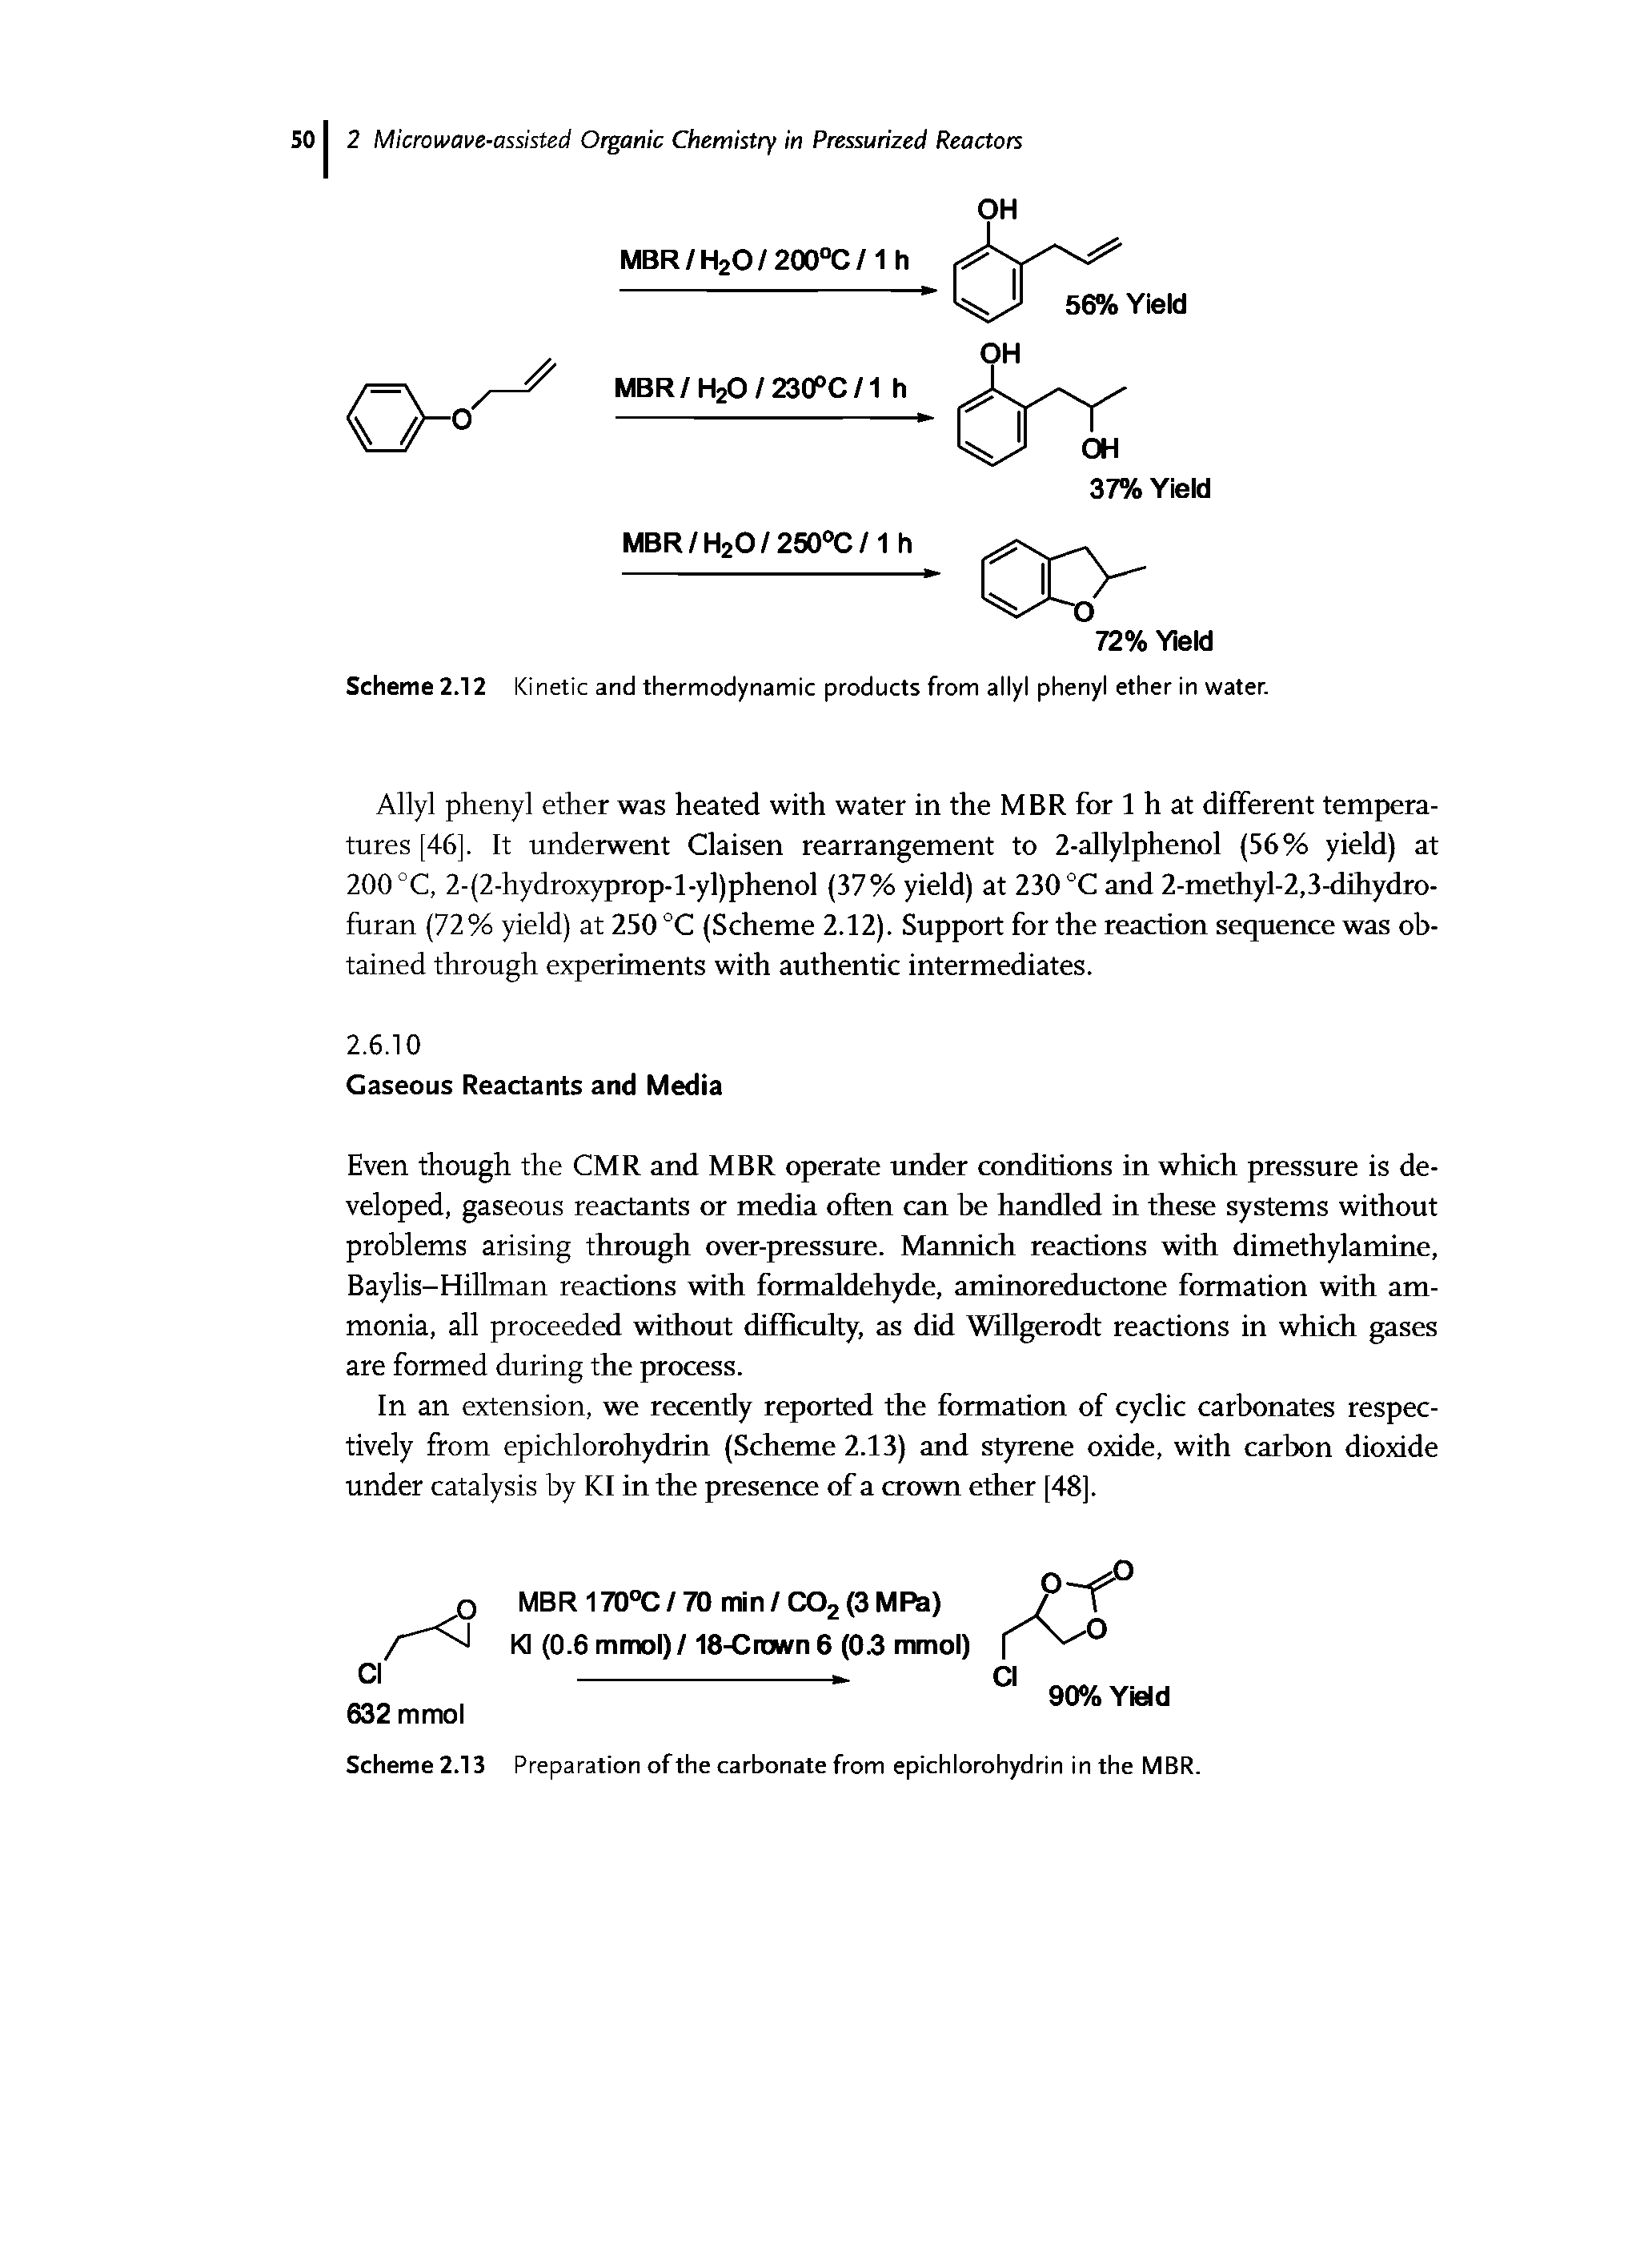 Scheme 2.12 Kinetic and thermodynamic products from allyl phenyl ether in water.